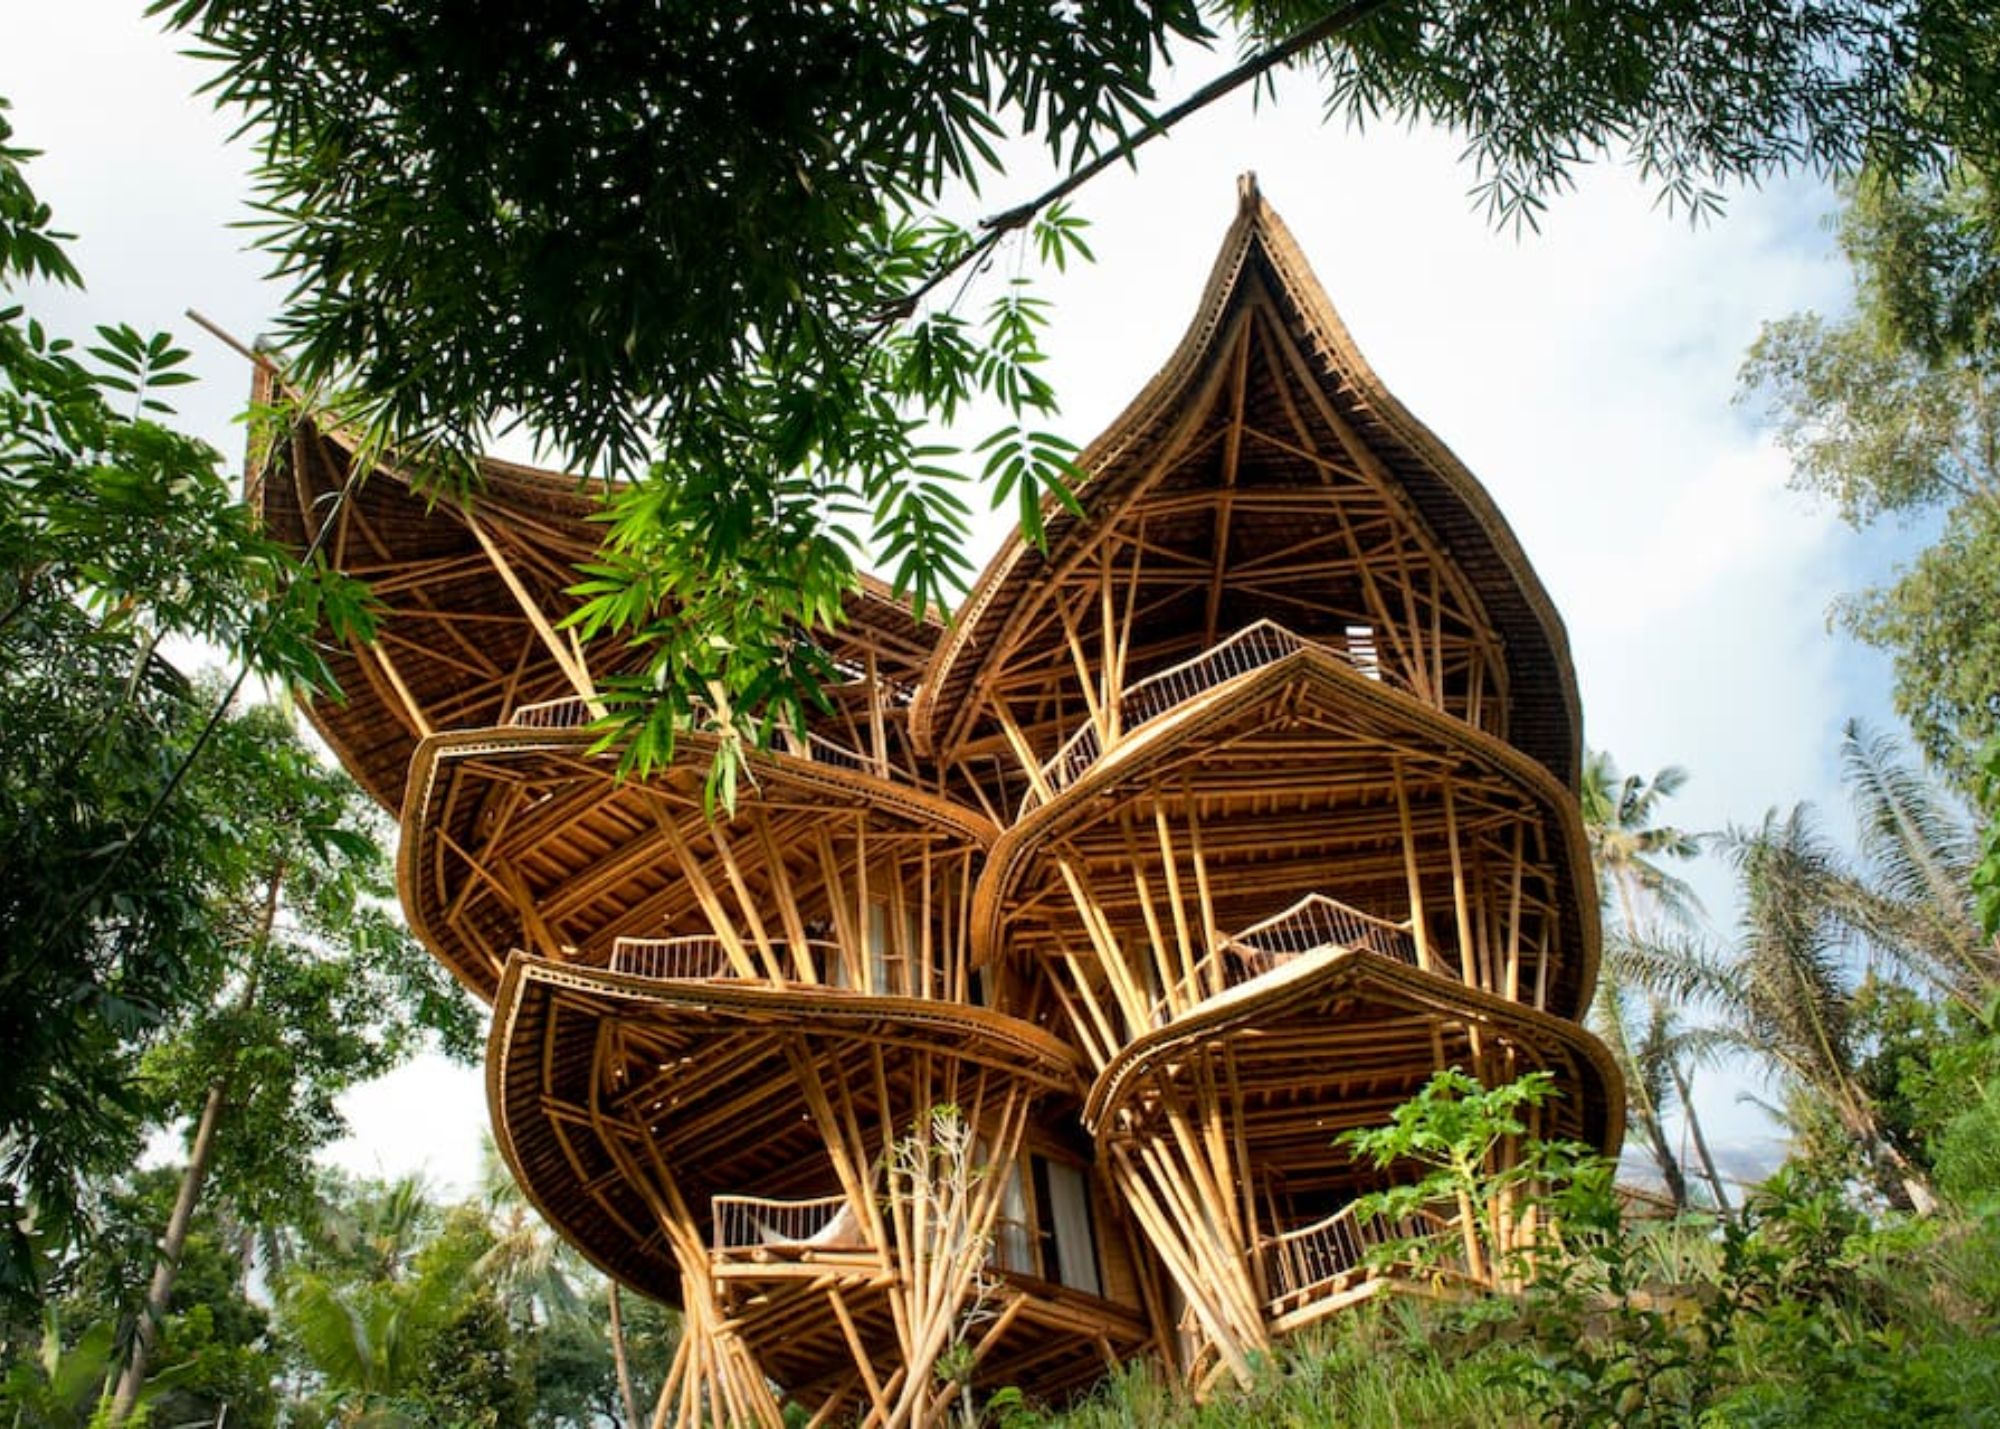 A house made of high-end bamboo designs with a pointed roof